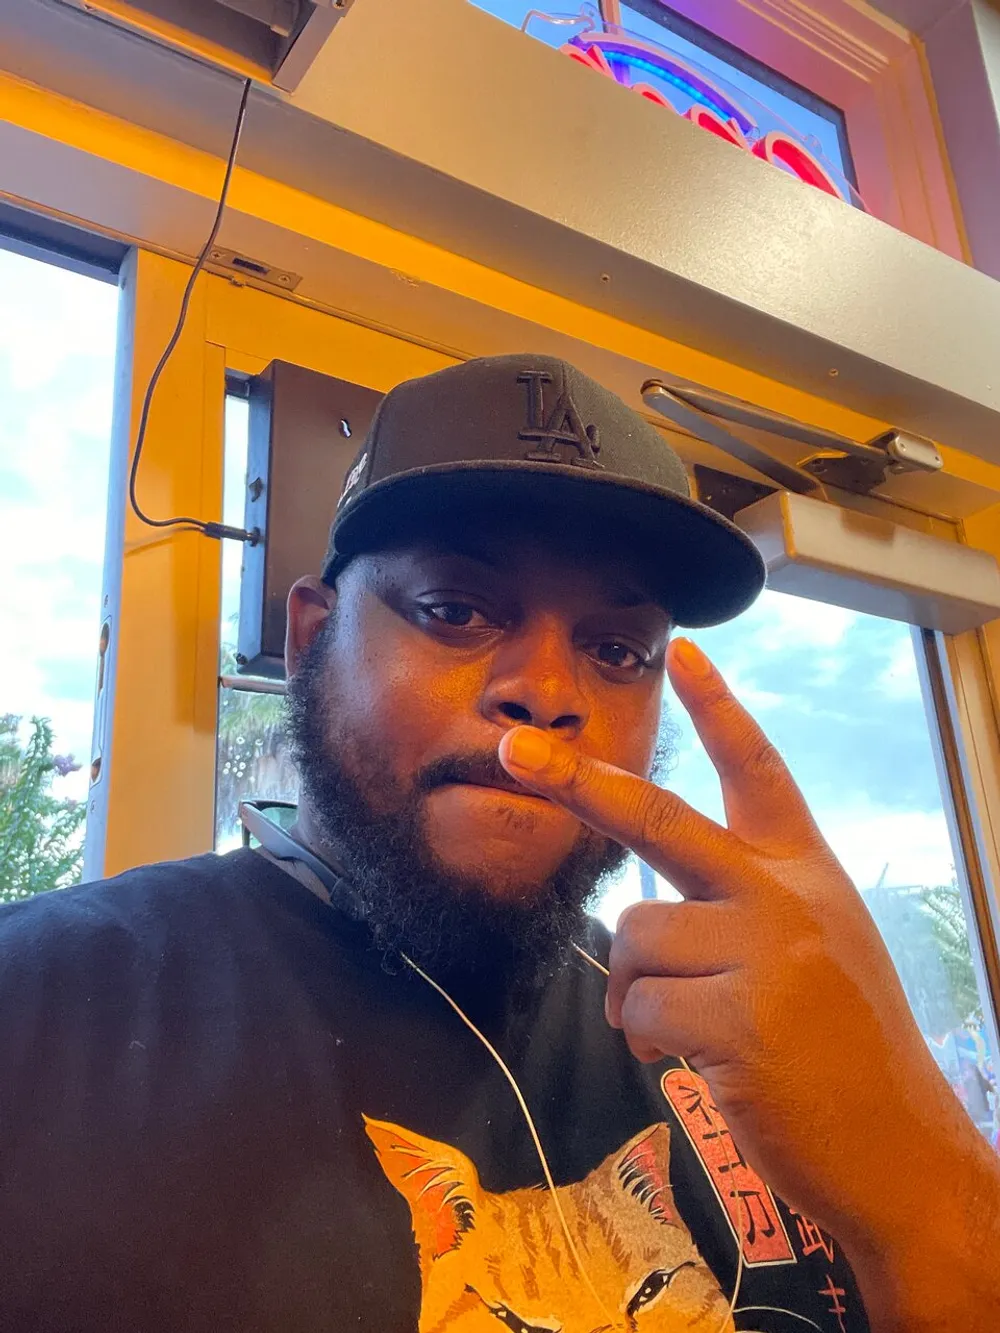 A person wearing a baseball cap is taking a selfie while making a peace sign with fingers on one hand and touching their nose with the other